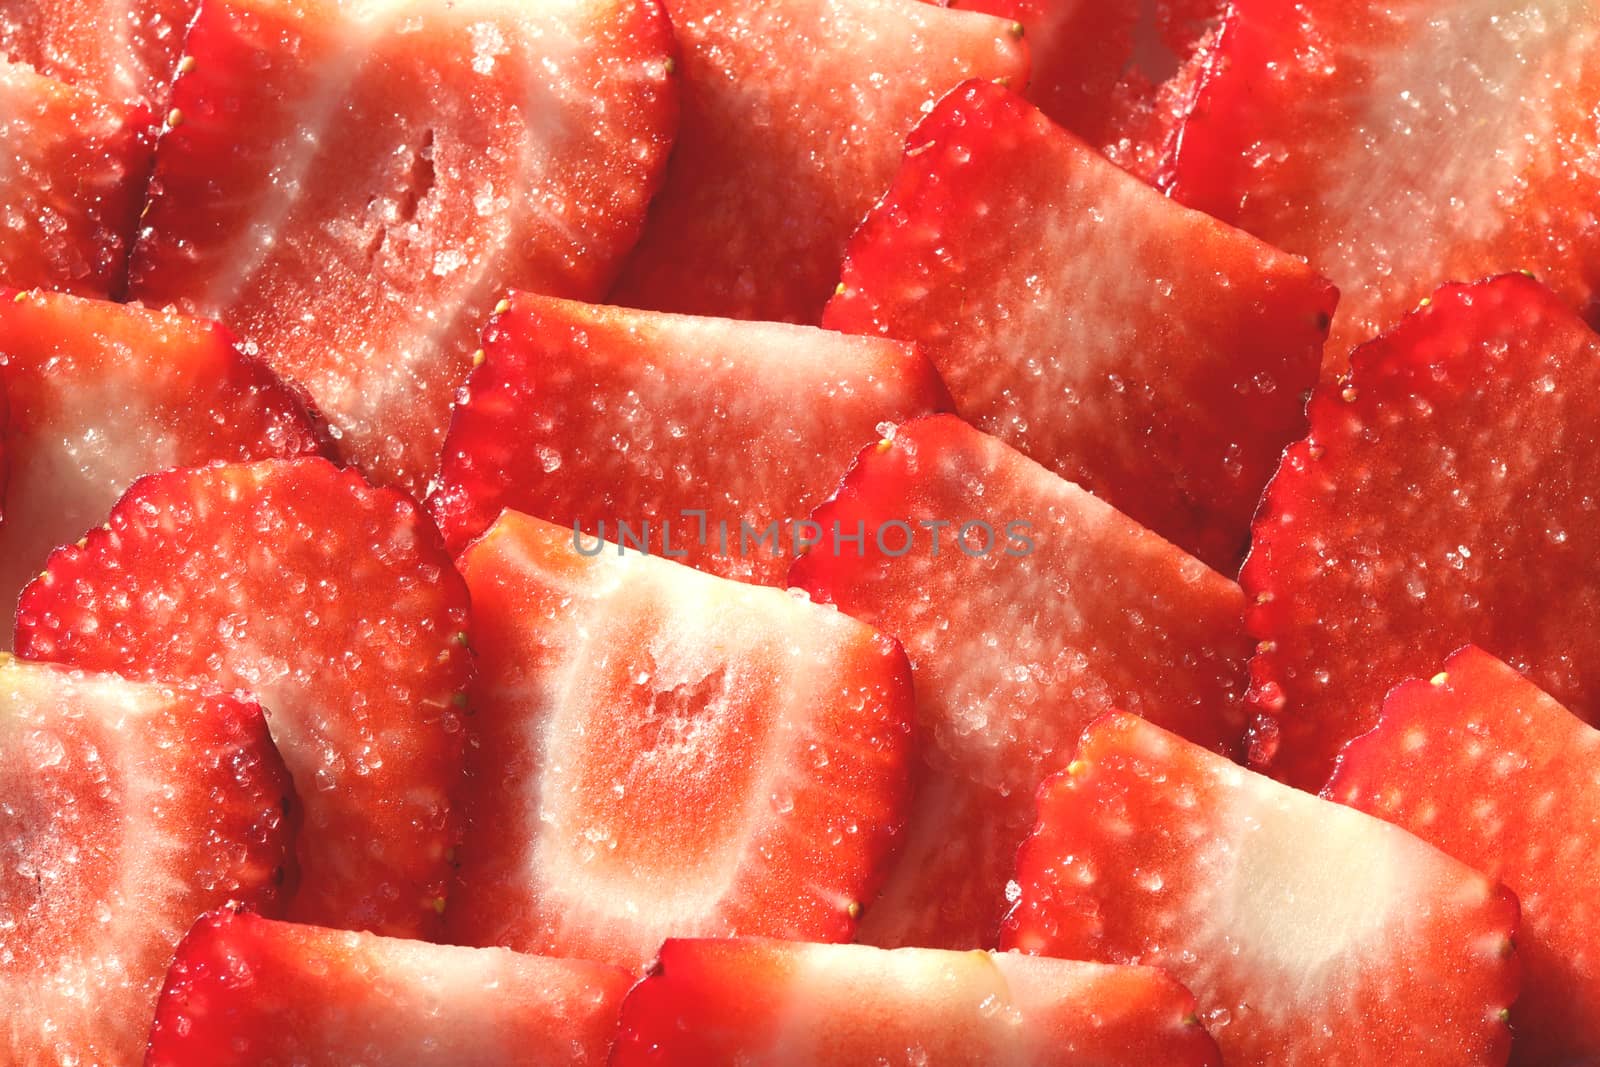 Vitamin berry backdrop. Strawberry slices in sugar filling background. Strawberry with sugar texture.